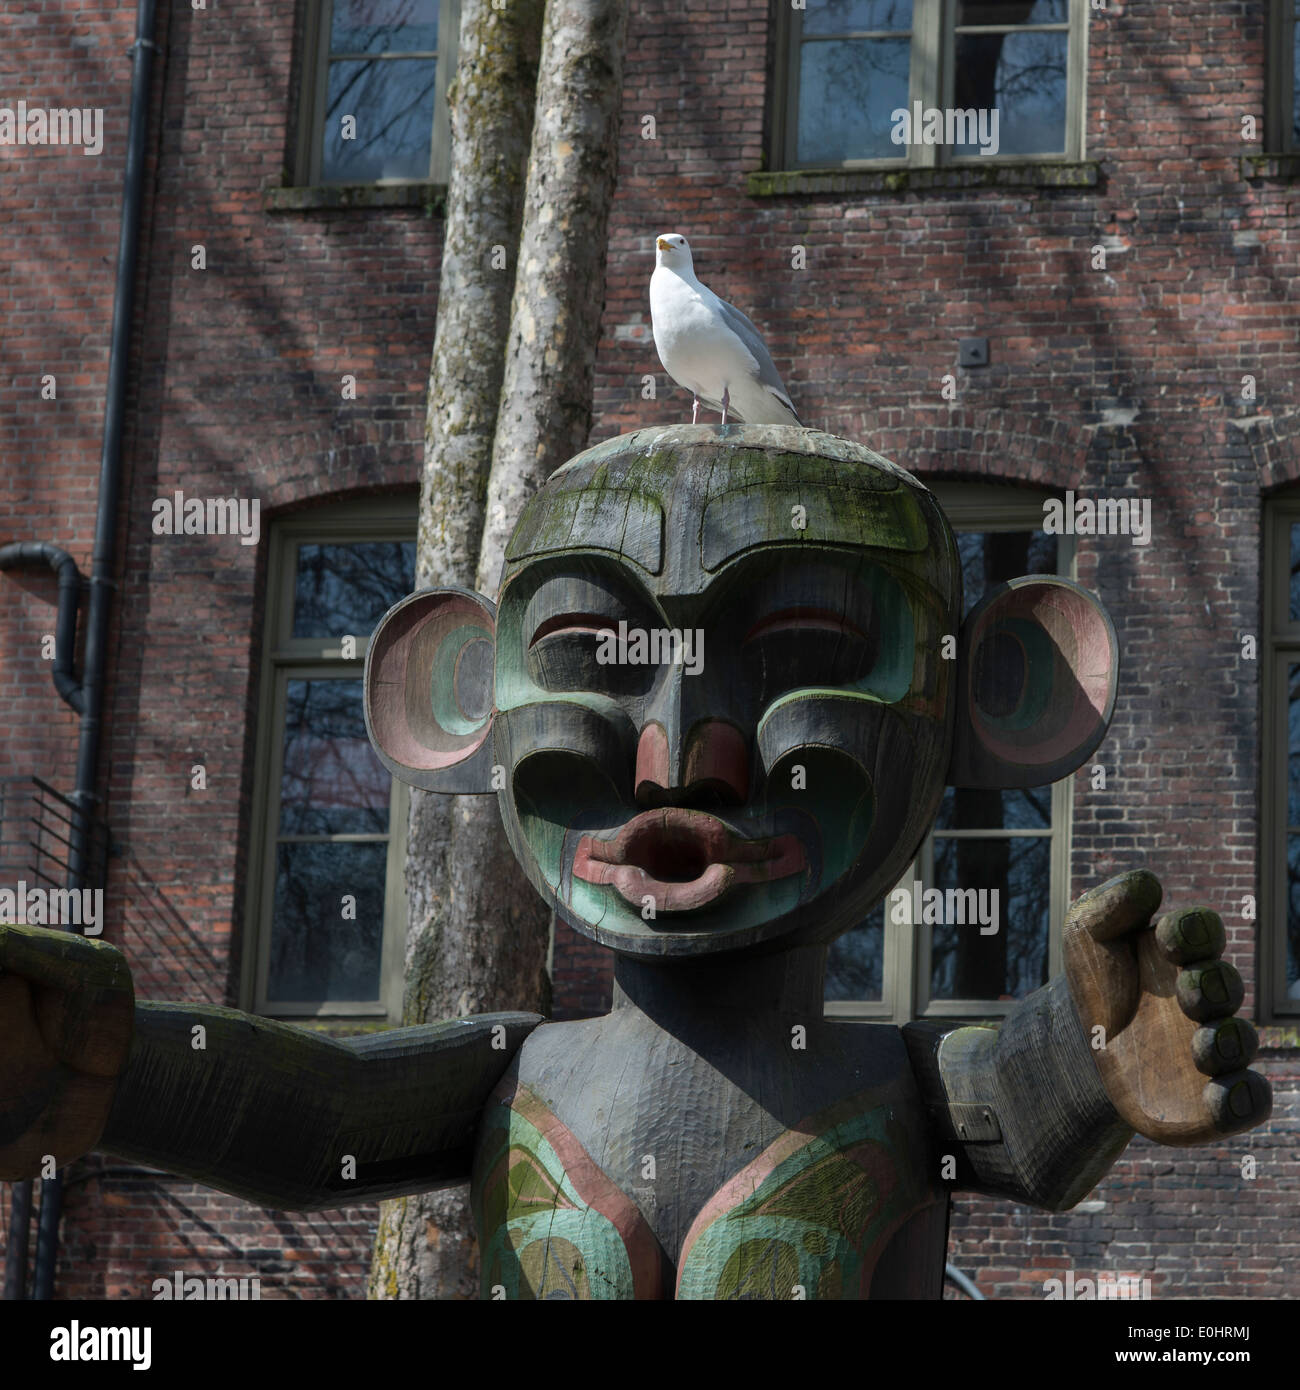 Totem pole in front of a building, Occidental Park, Pioneer Square, Seattle, Washington State, USA Stock Photo